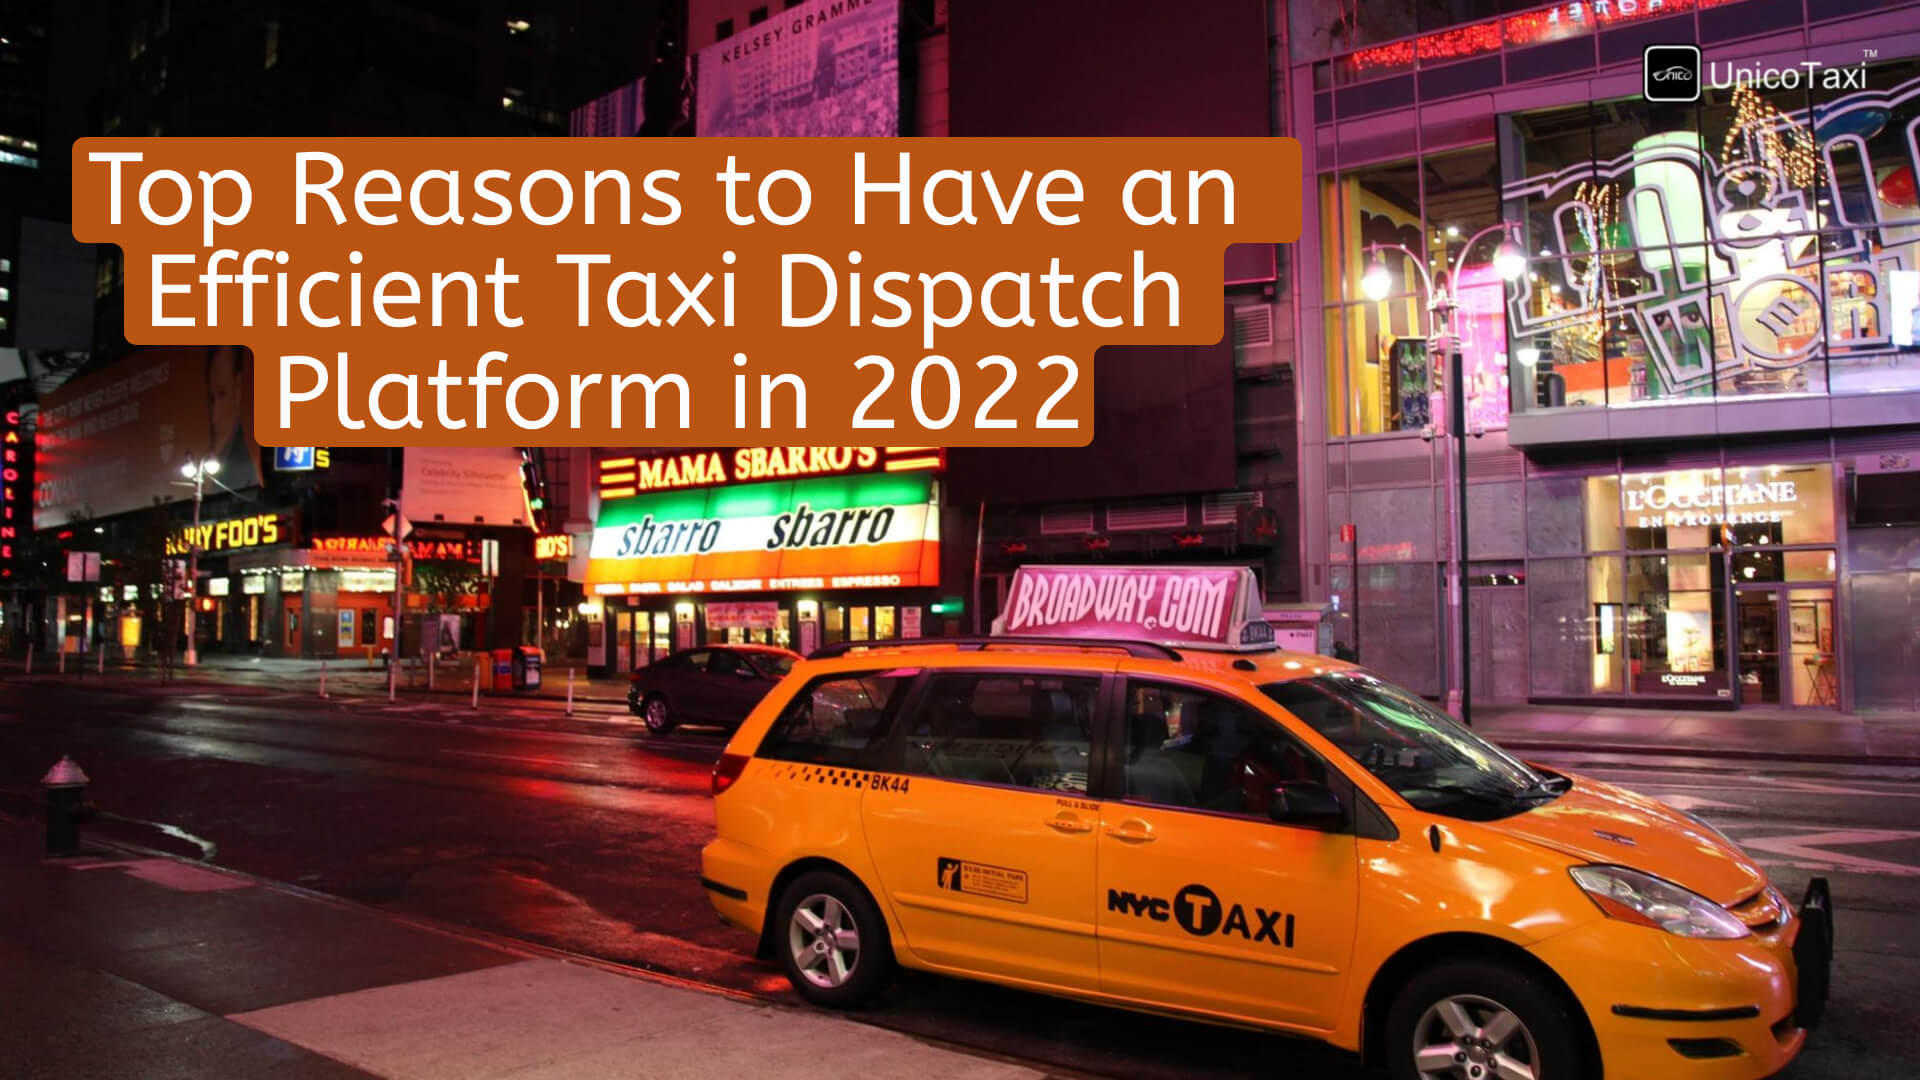 Top Reasons to Have an Efficient Taxi Dispatch Platform in 2022